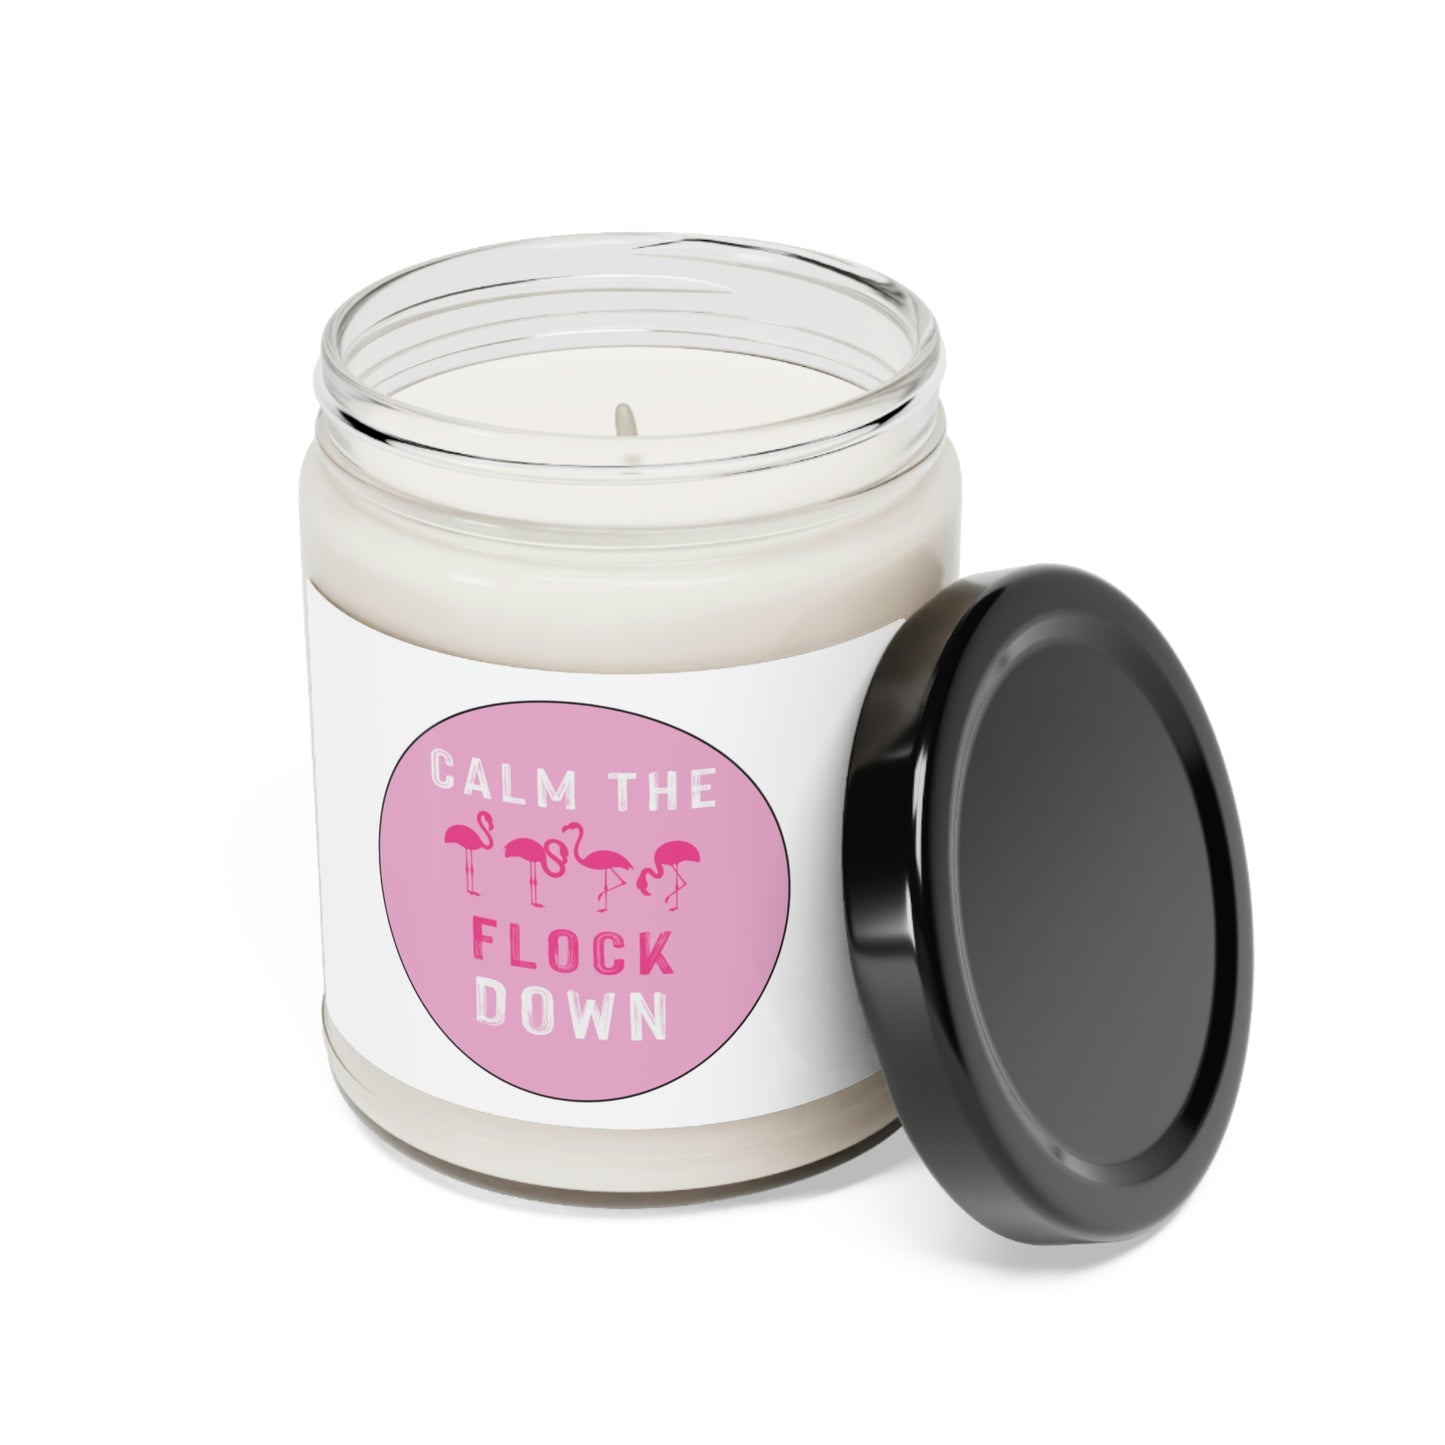 Calm the Flock DownScented Soy Candle, 9oz